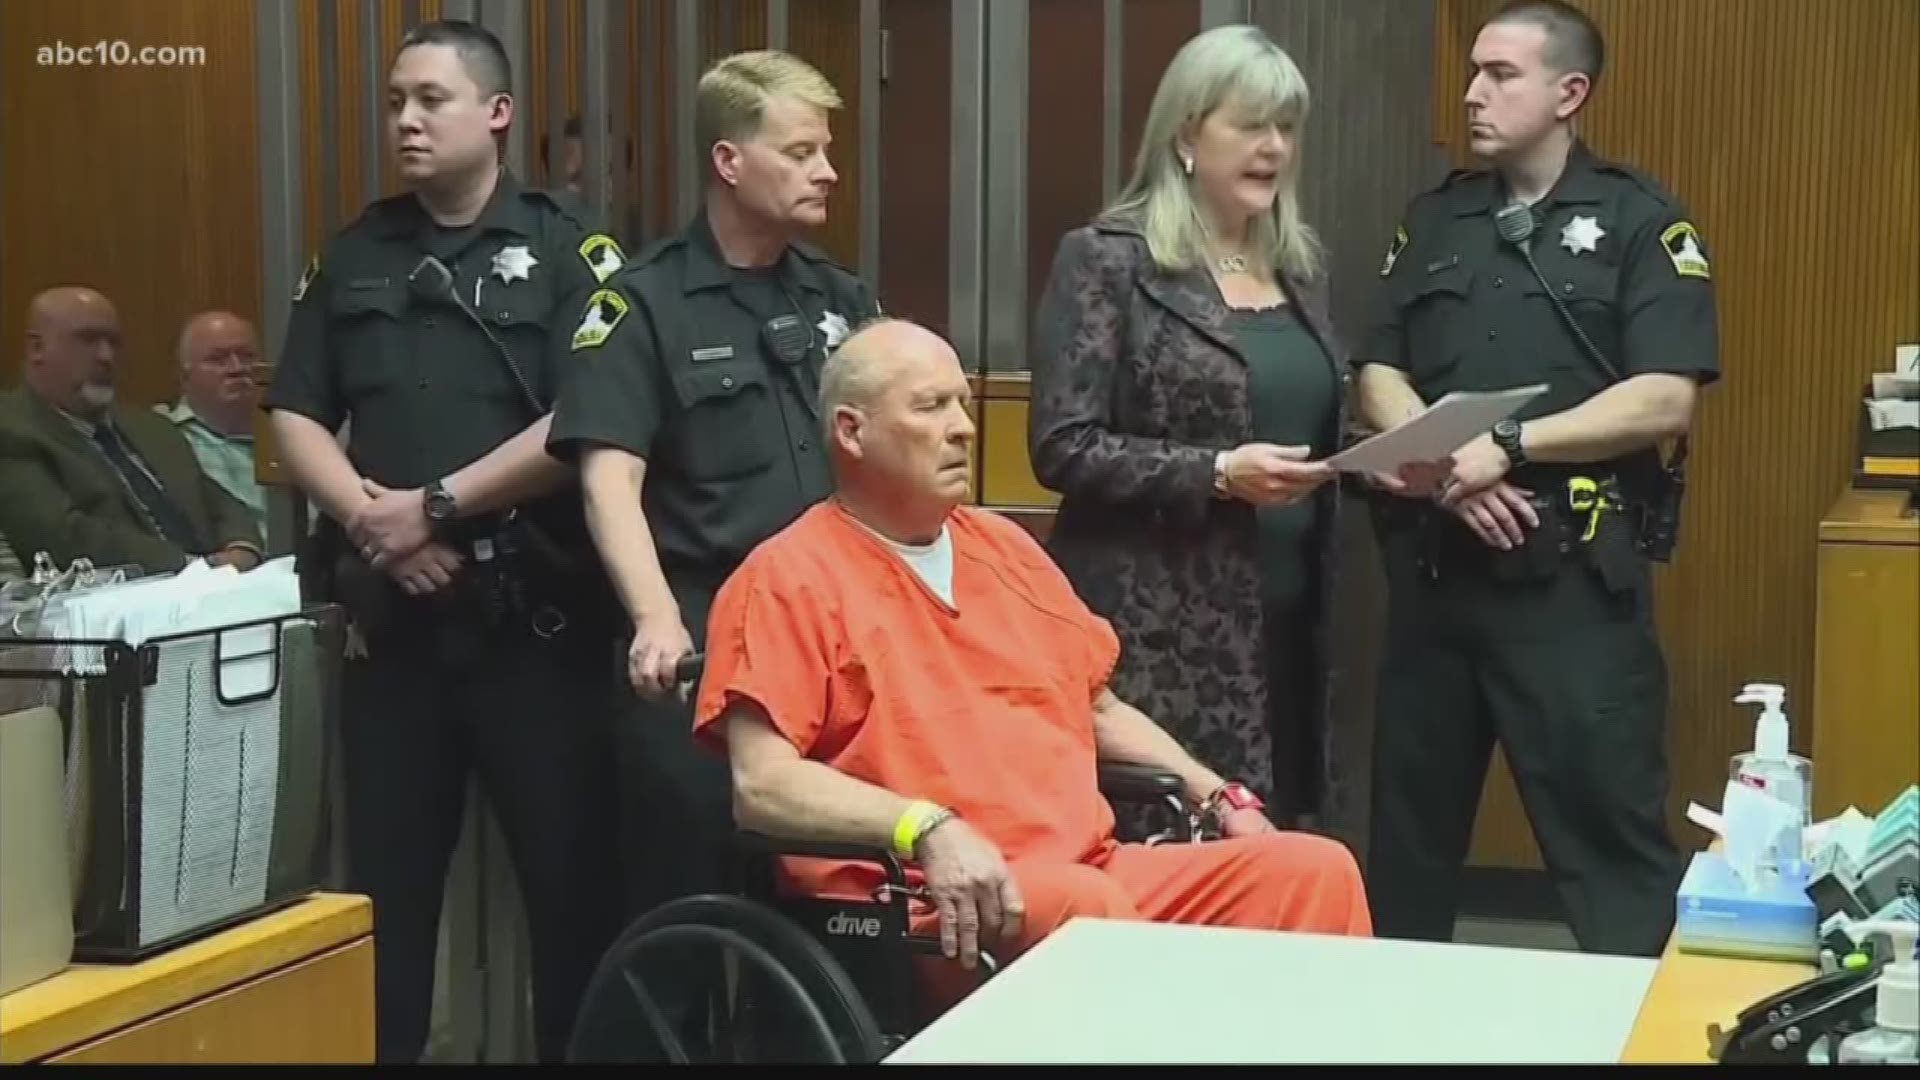 The 72-year-old former police officer who authorities say is the Golden State Killer appeared in court Wednesday as his lawyer tried to limit additional evidence from being gathered.